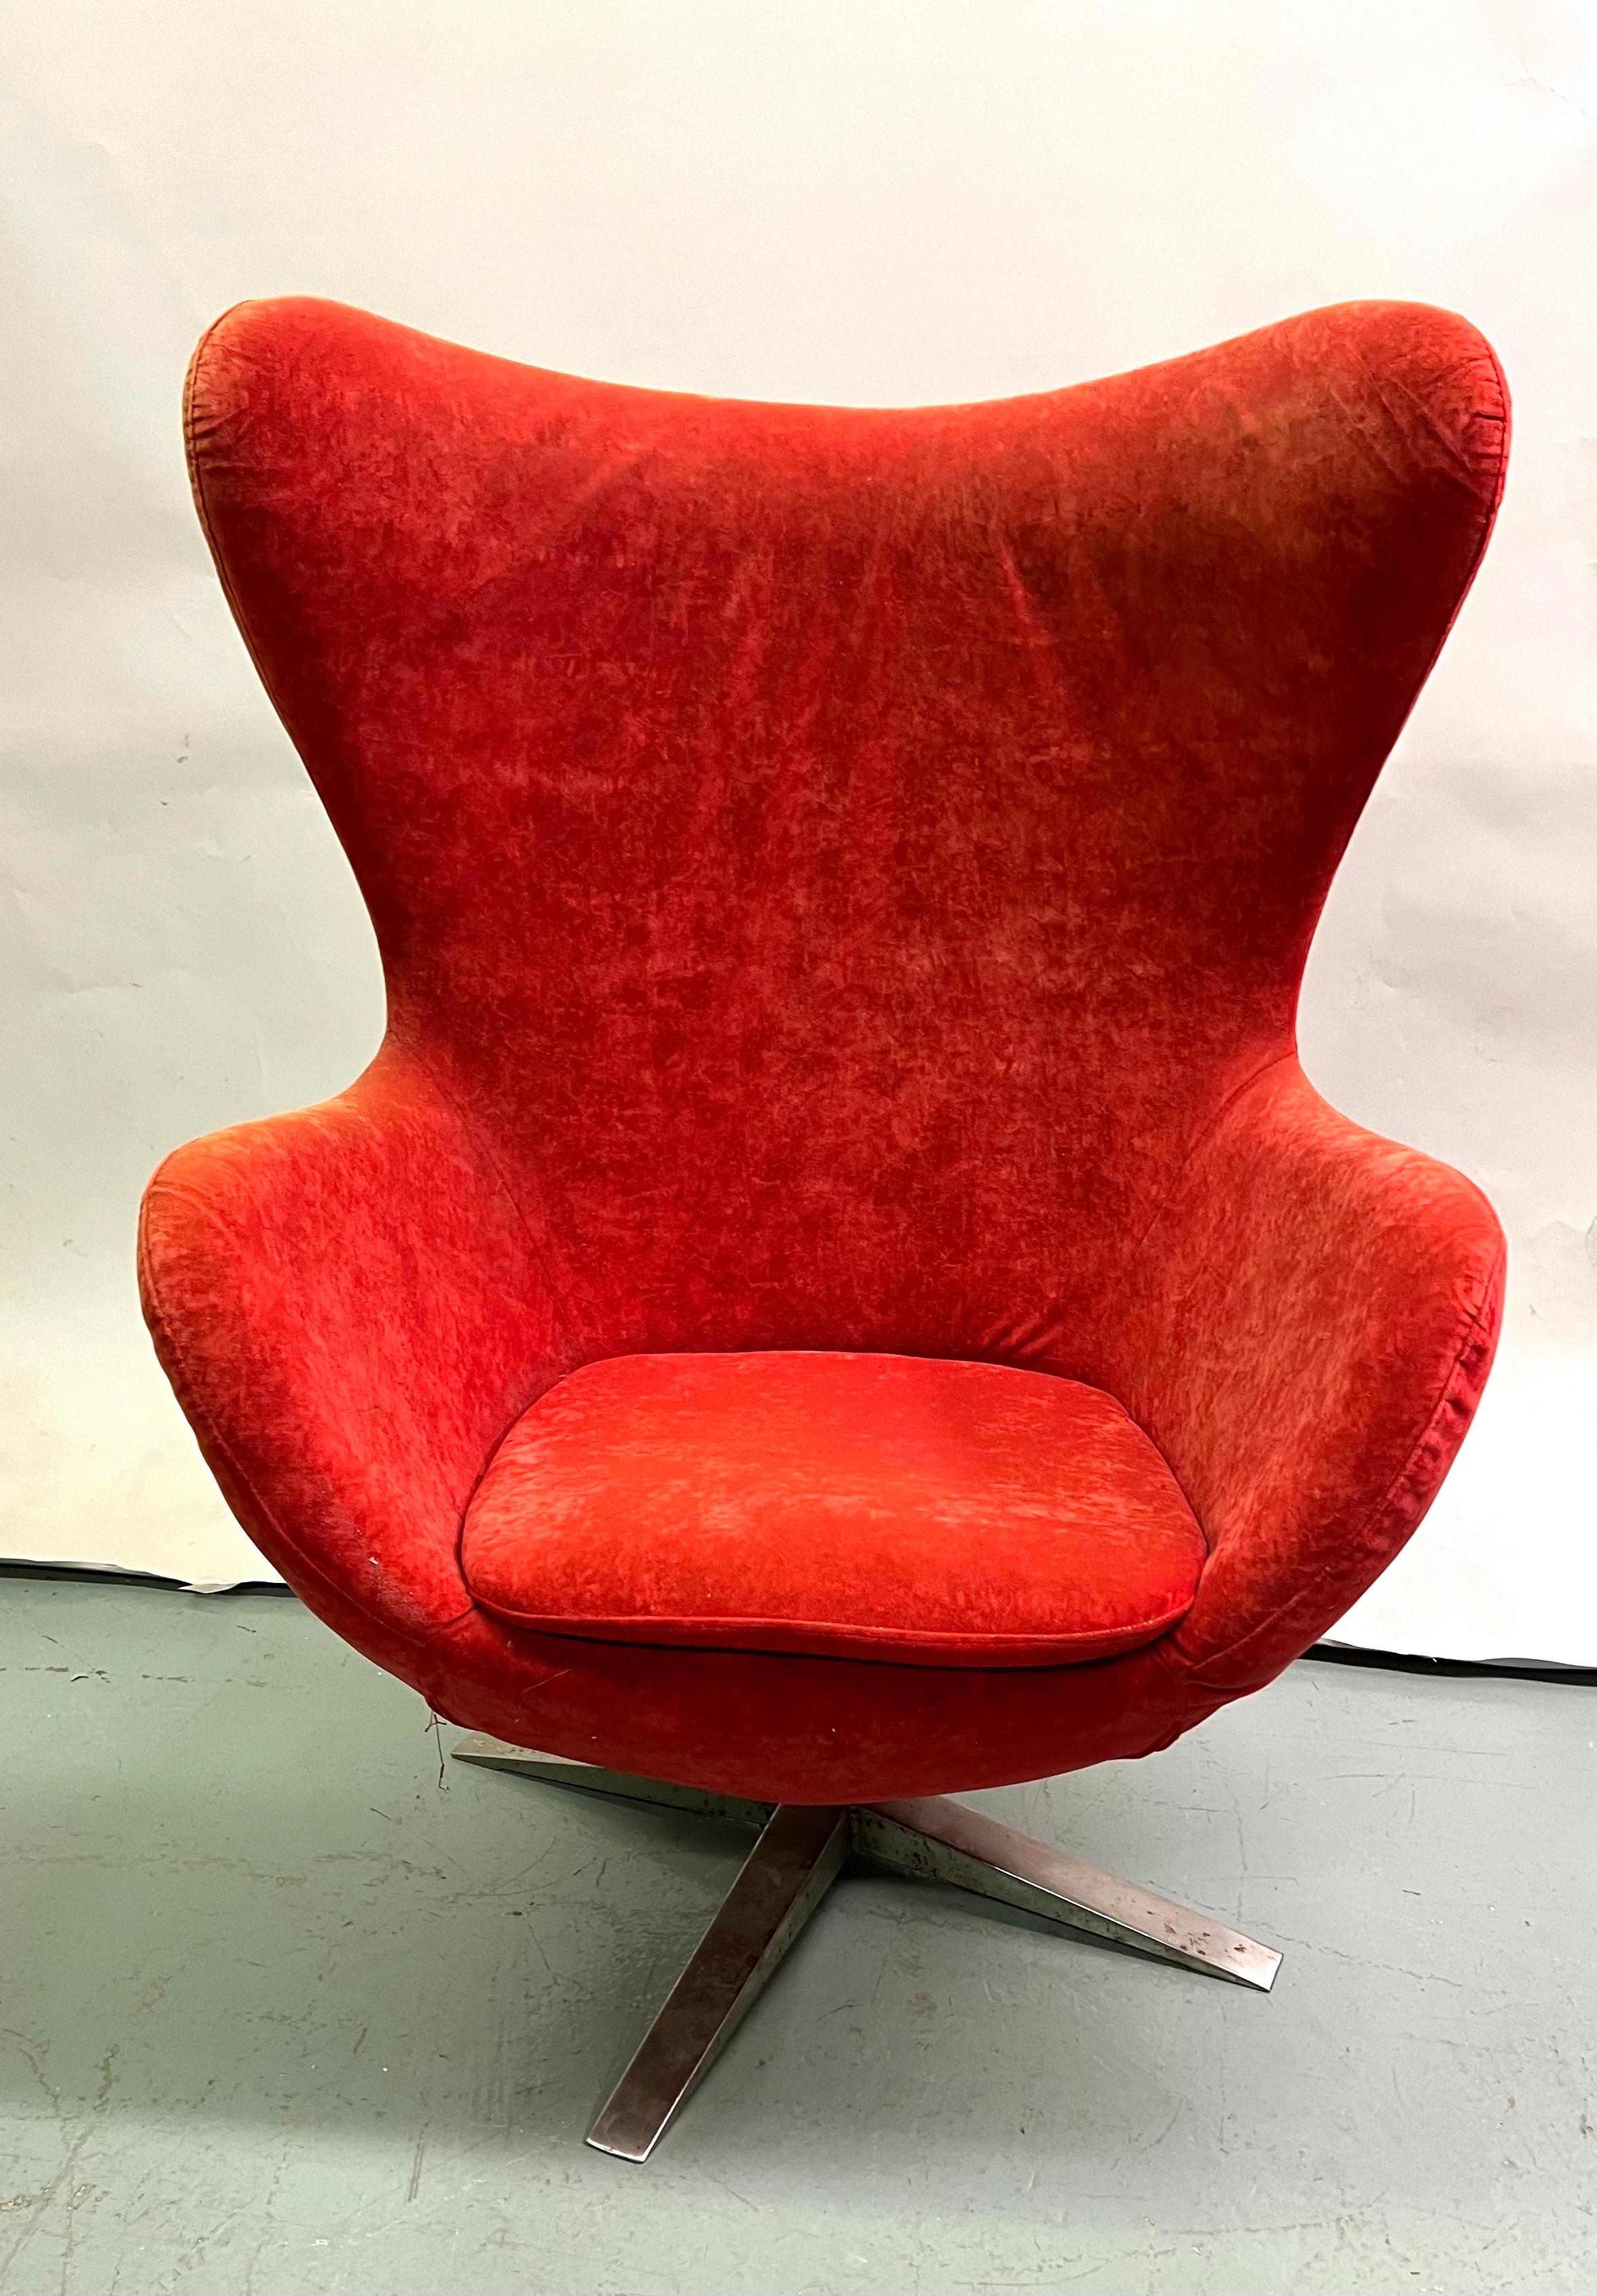 Set of 3 Danish Organic Modern Egg Lounge Chairs attr. Arne Jacobsen, 2 Leather  In Fair Condition For Sale In New York, NY